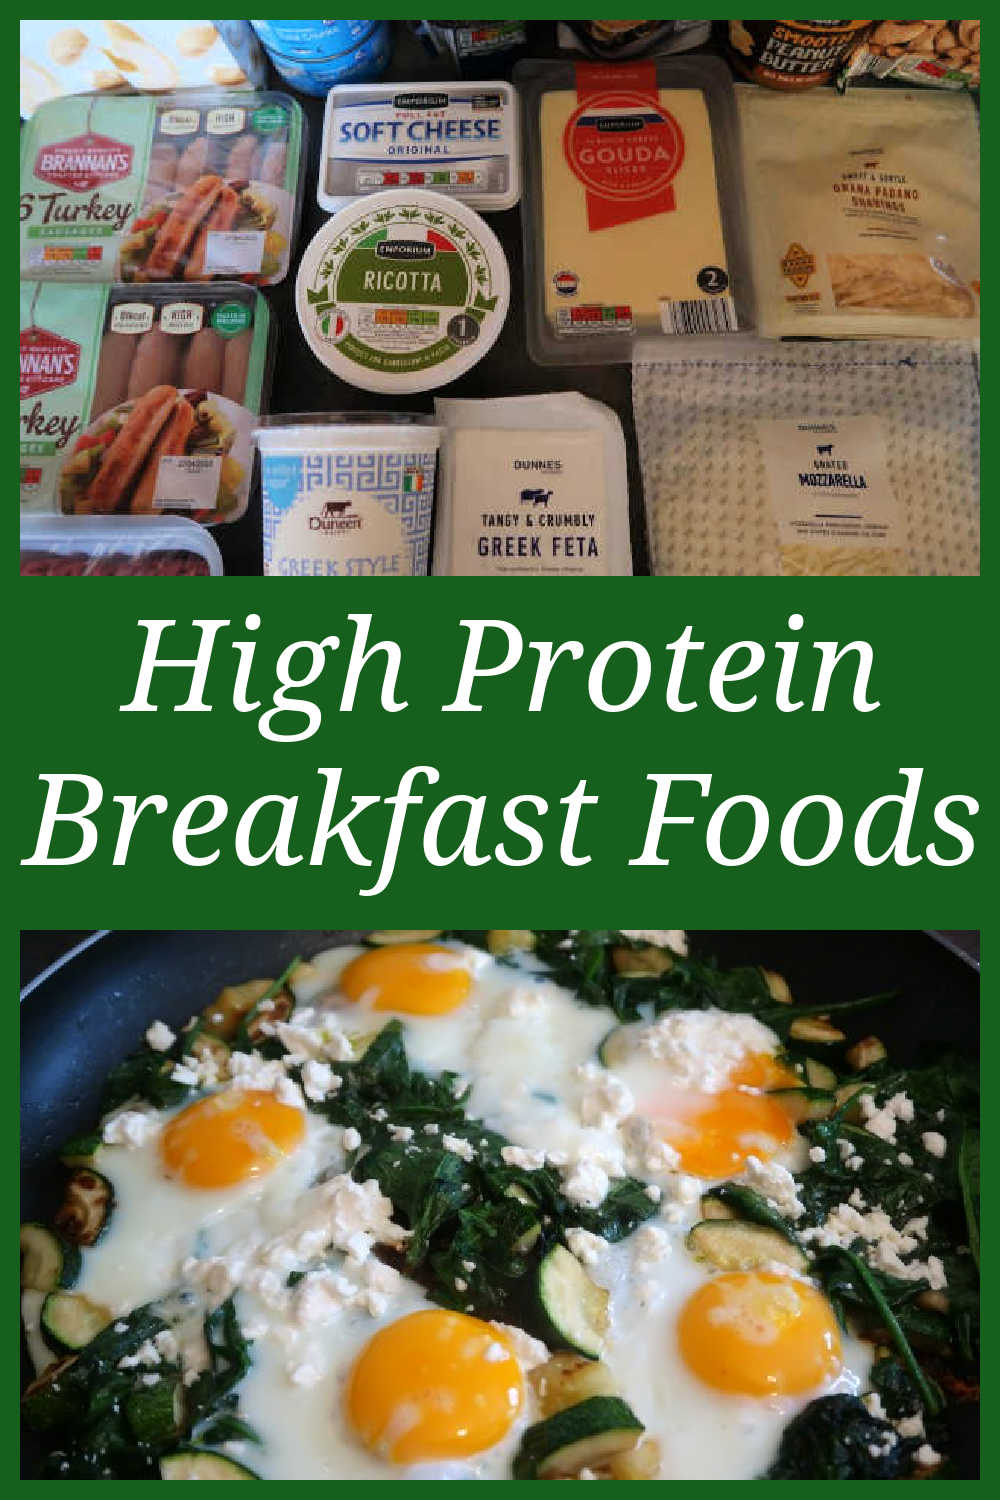 High Protein Breakfast Foods - best easy ideas and recipes for breakfasts that are naturally high-protein, filling and delicious - with a video.